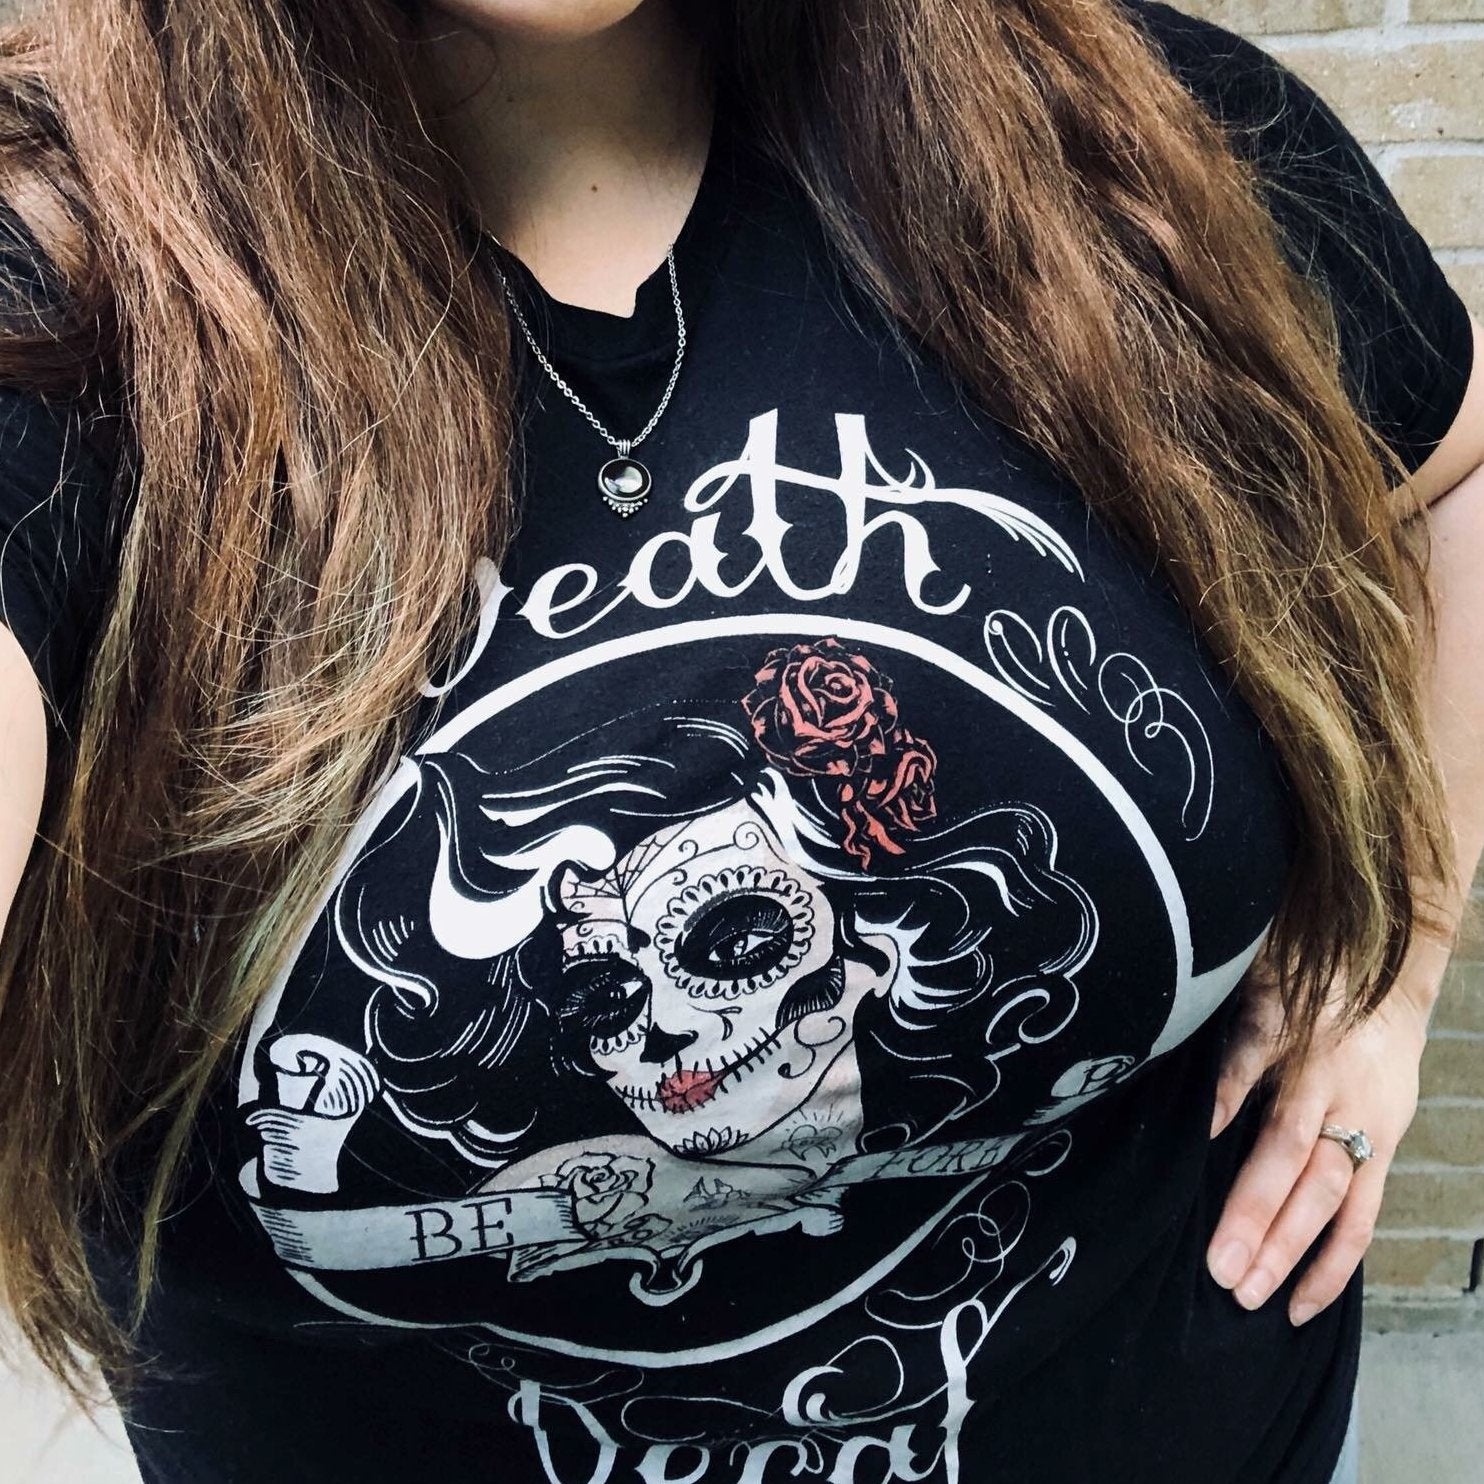 « DEATH BEFORE DECAF » WOMEN'S SLOUCHY OR UNISEX TEE